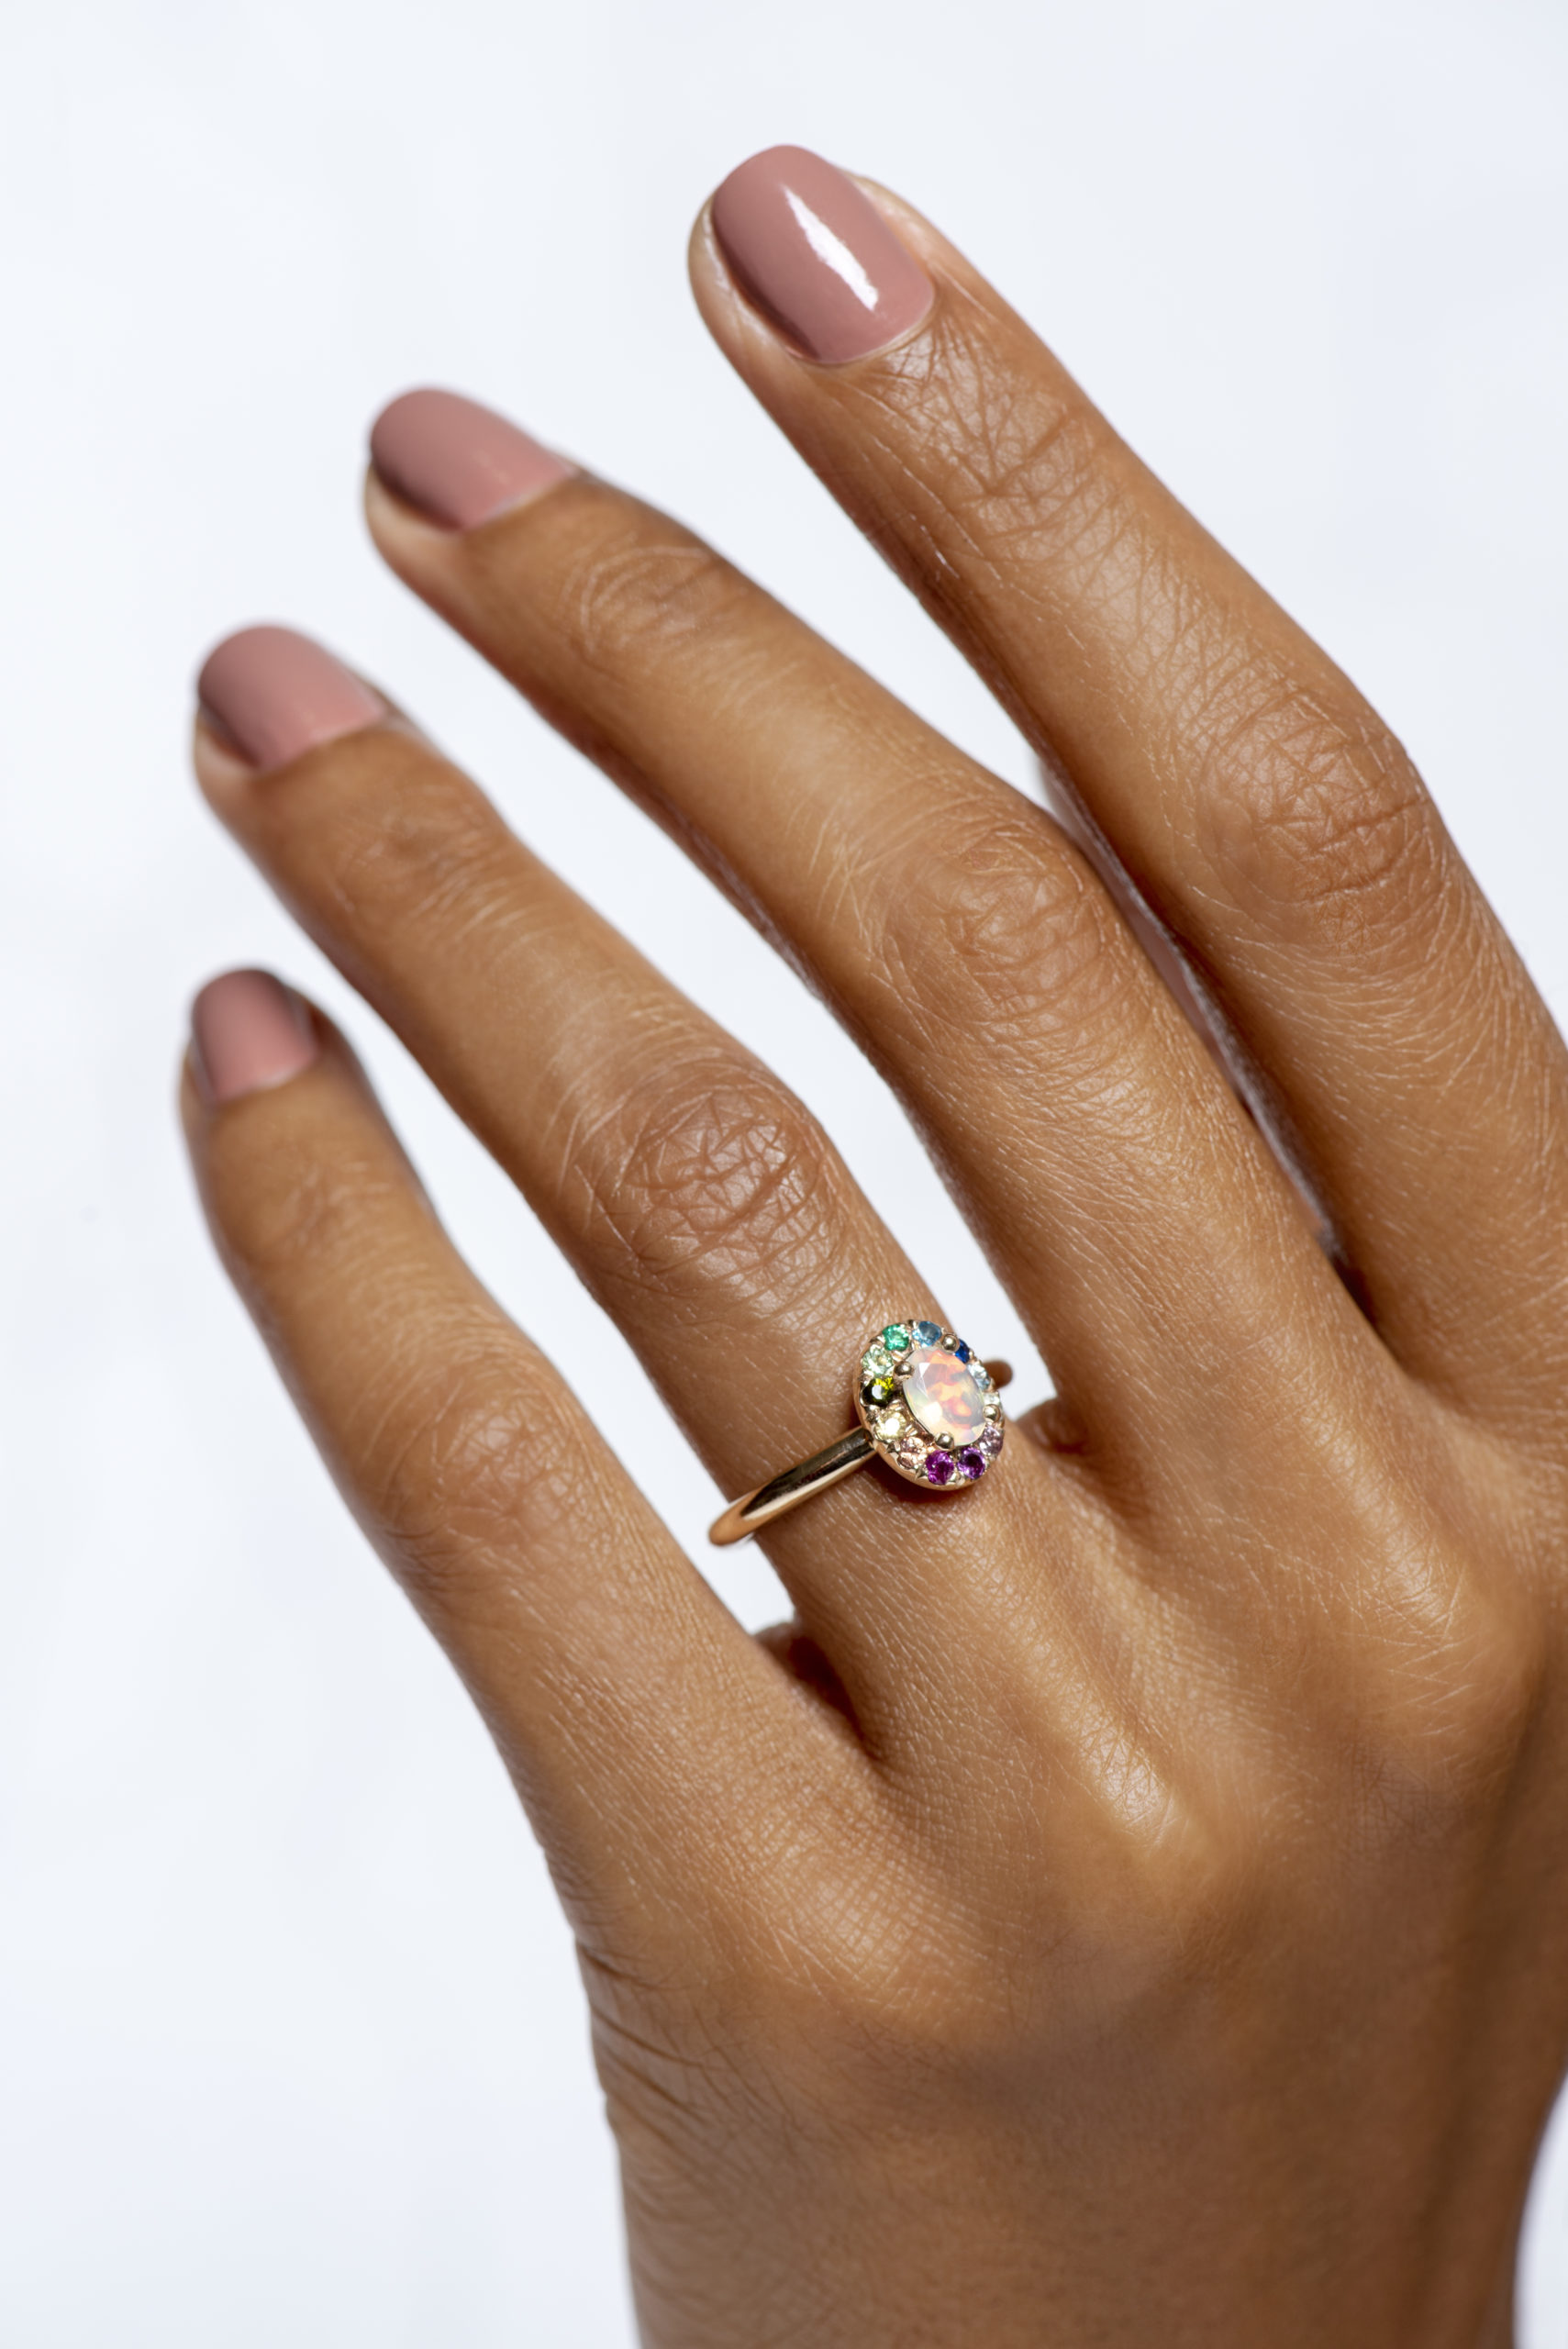 9 Do'S And Don'Ts For Pretty Opal Rings